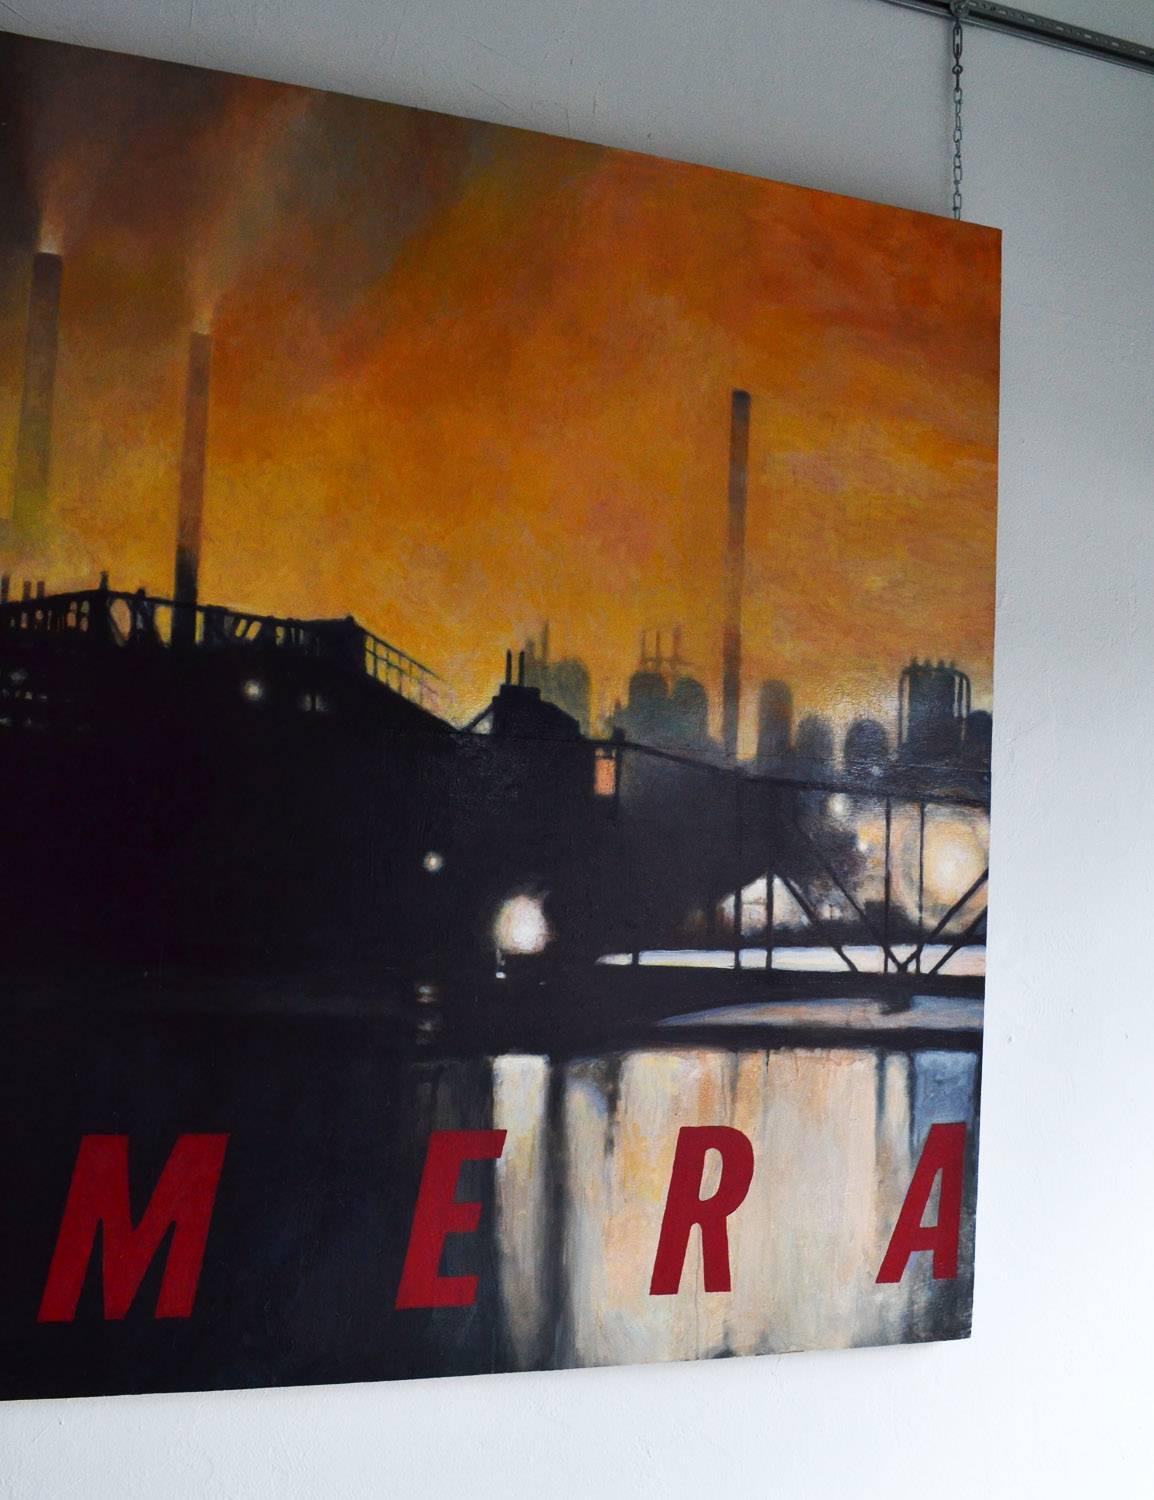 Large Oil on Board by Lawrence Gipe, Factory Series, 1998 Industrial Modern 
Lawrence Gipe (American b. 1962) 'Factory' series oil on board, 1998, Untitled No. 15. Massive, impressive and foreboding 60” x 84” mixed-media oil painting depicting a